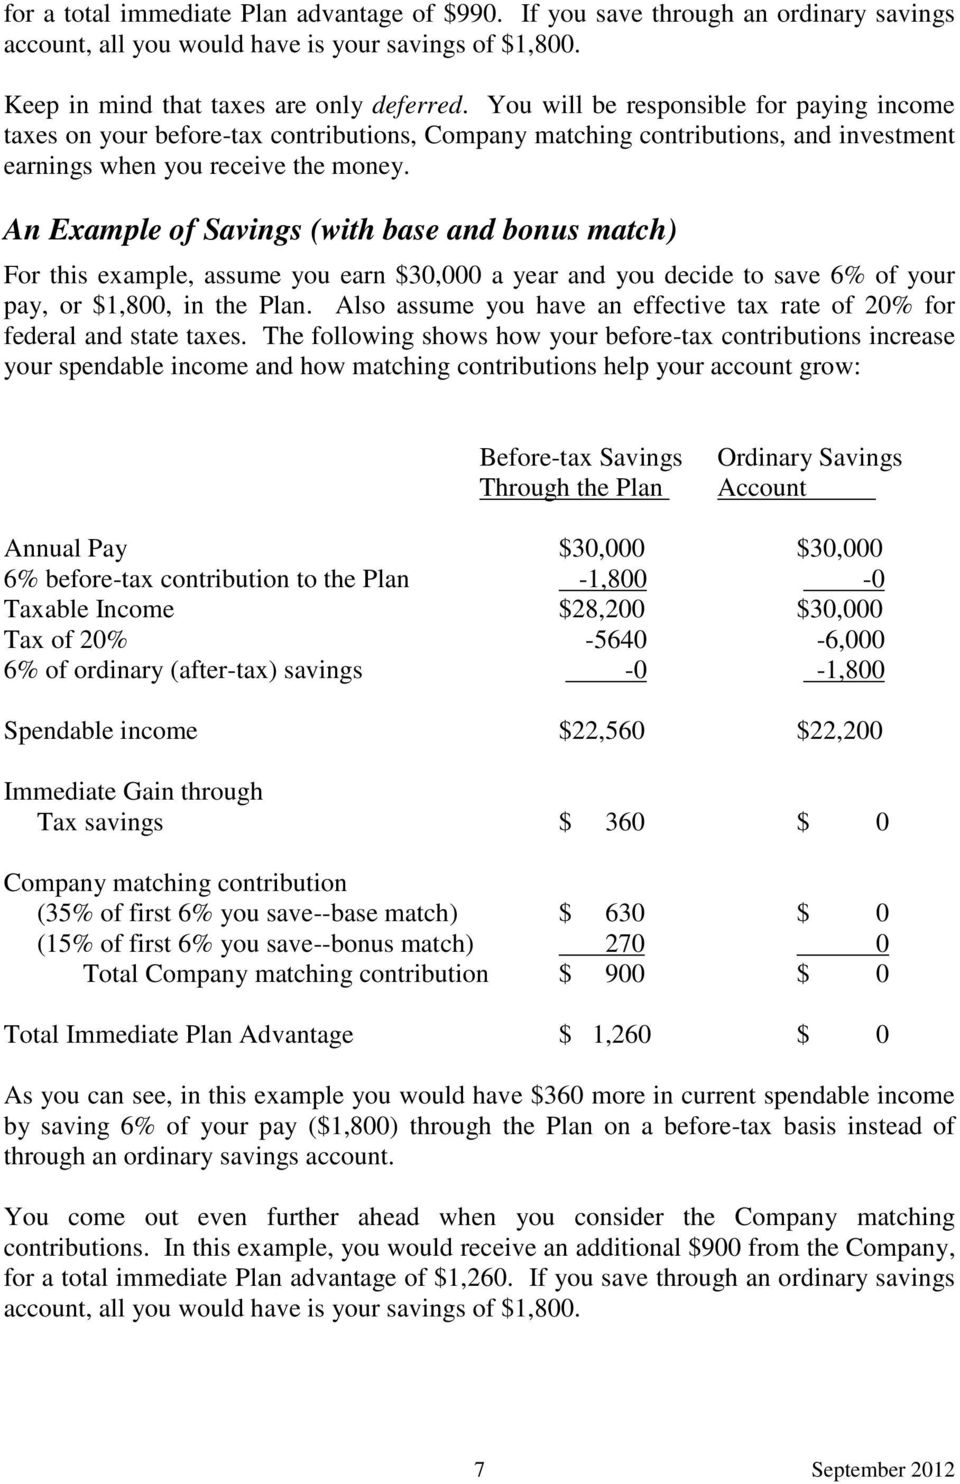 An Example of Savings (with base and bonus match) For this example, assume you earn $30,000 a year and you decide to save 6% of your pay, or $1,800, in the Plan.